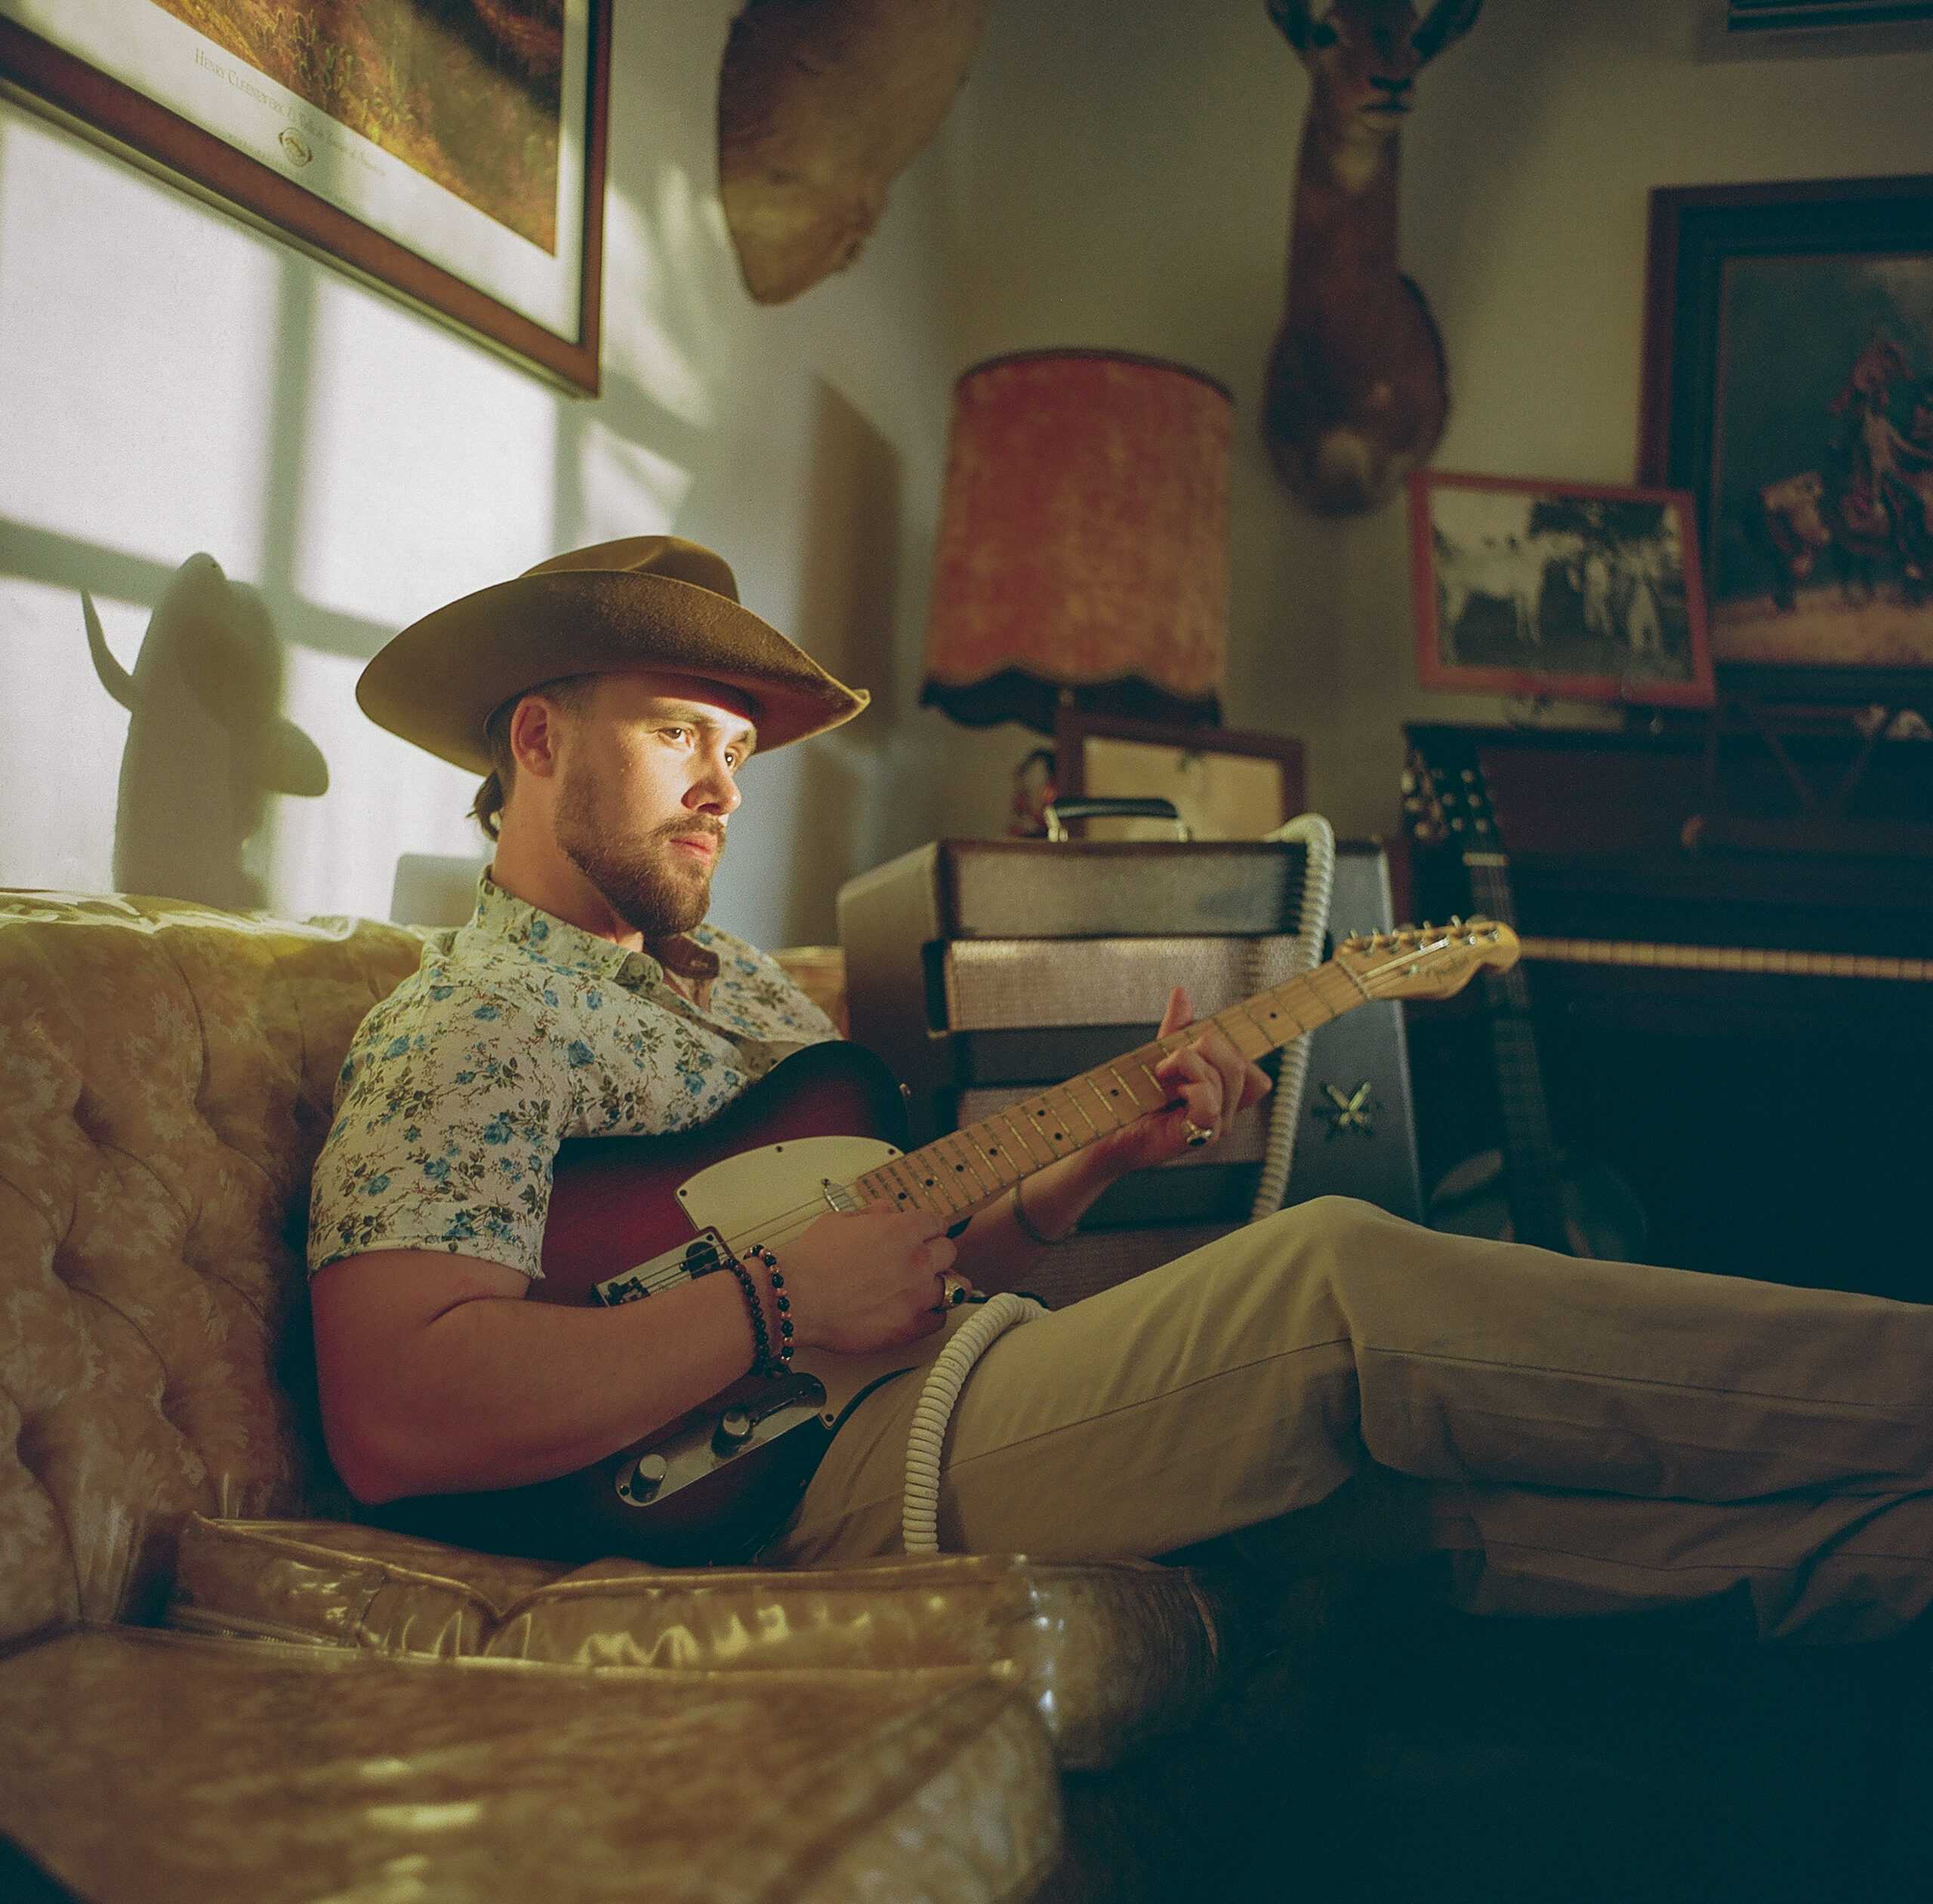 A man playing a guitar while sitting on a couch